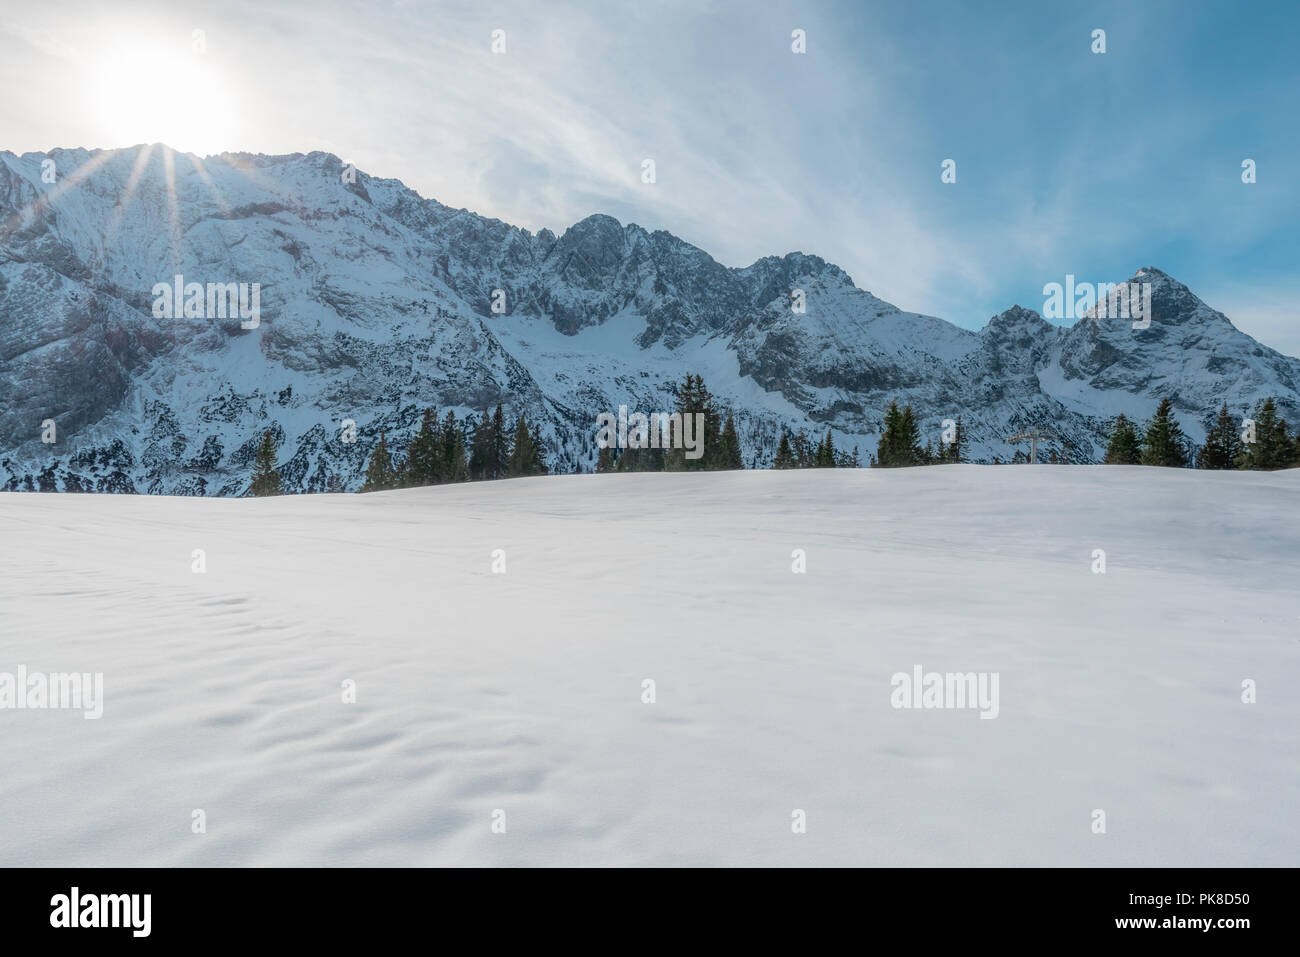 Winter landscape with the Austrian Alps with snow-capped peaks and a snowy valley, on a sunny day in December, in Ehrwald, Austria. Stock Photo